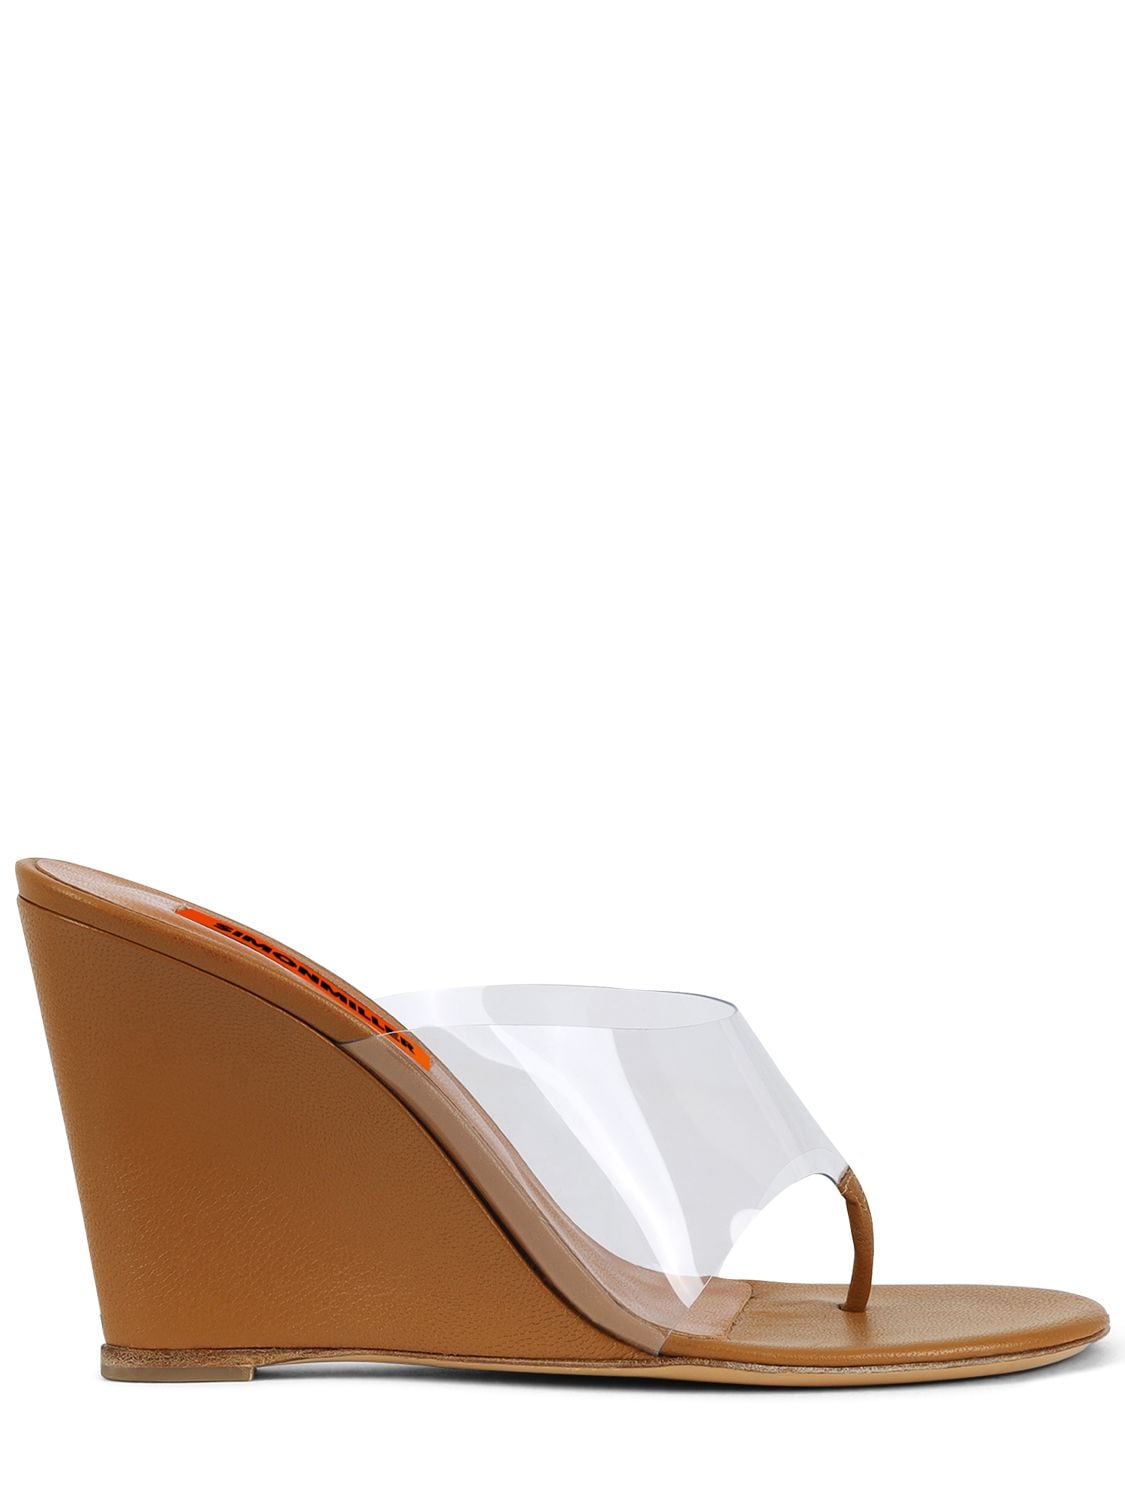 SIMON MILLER 100MM GHOST LEATHER & PVC WEDGES